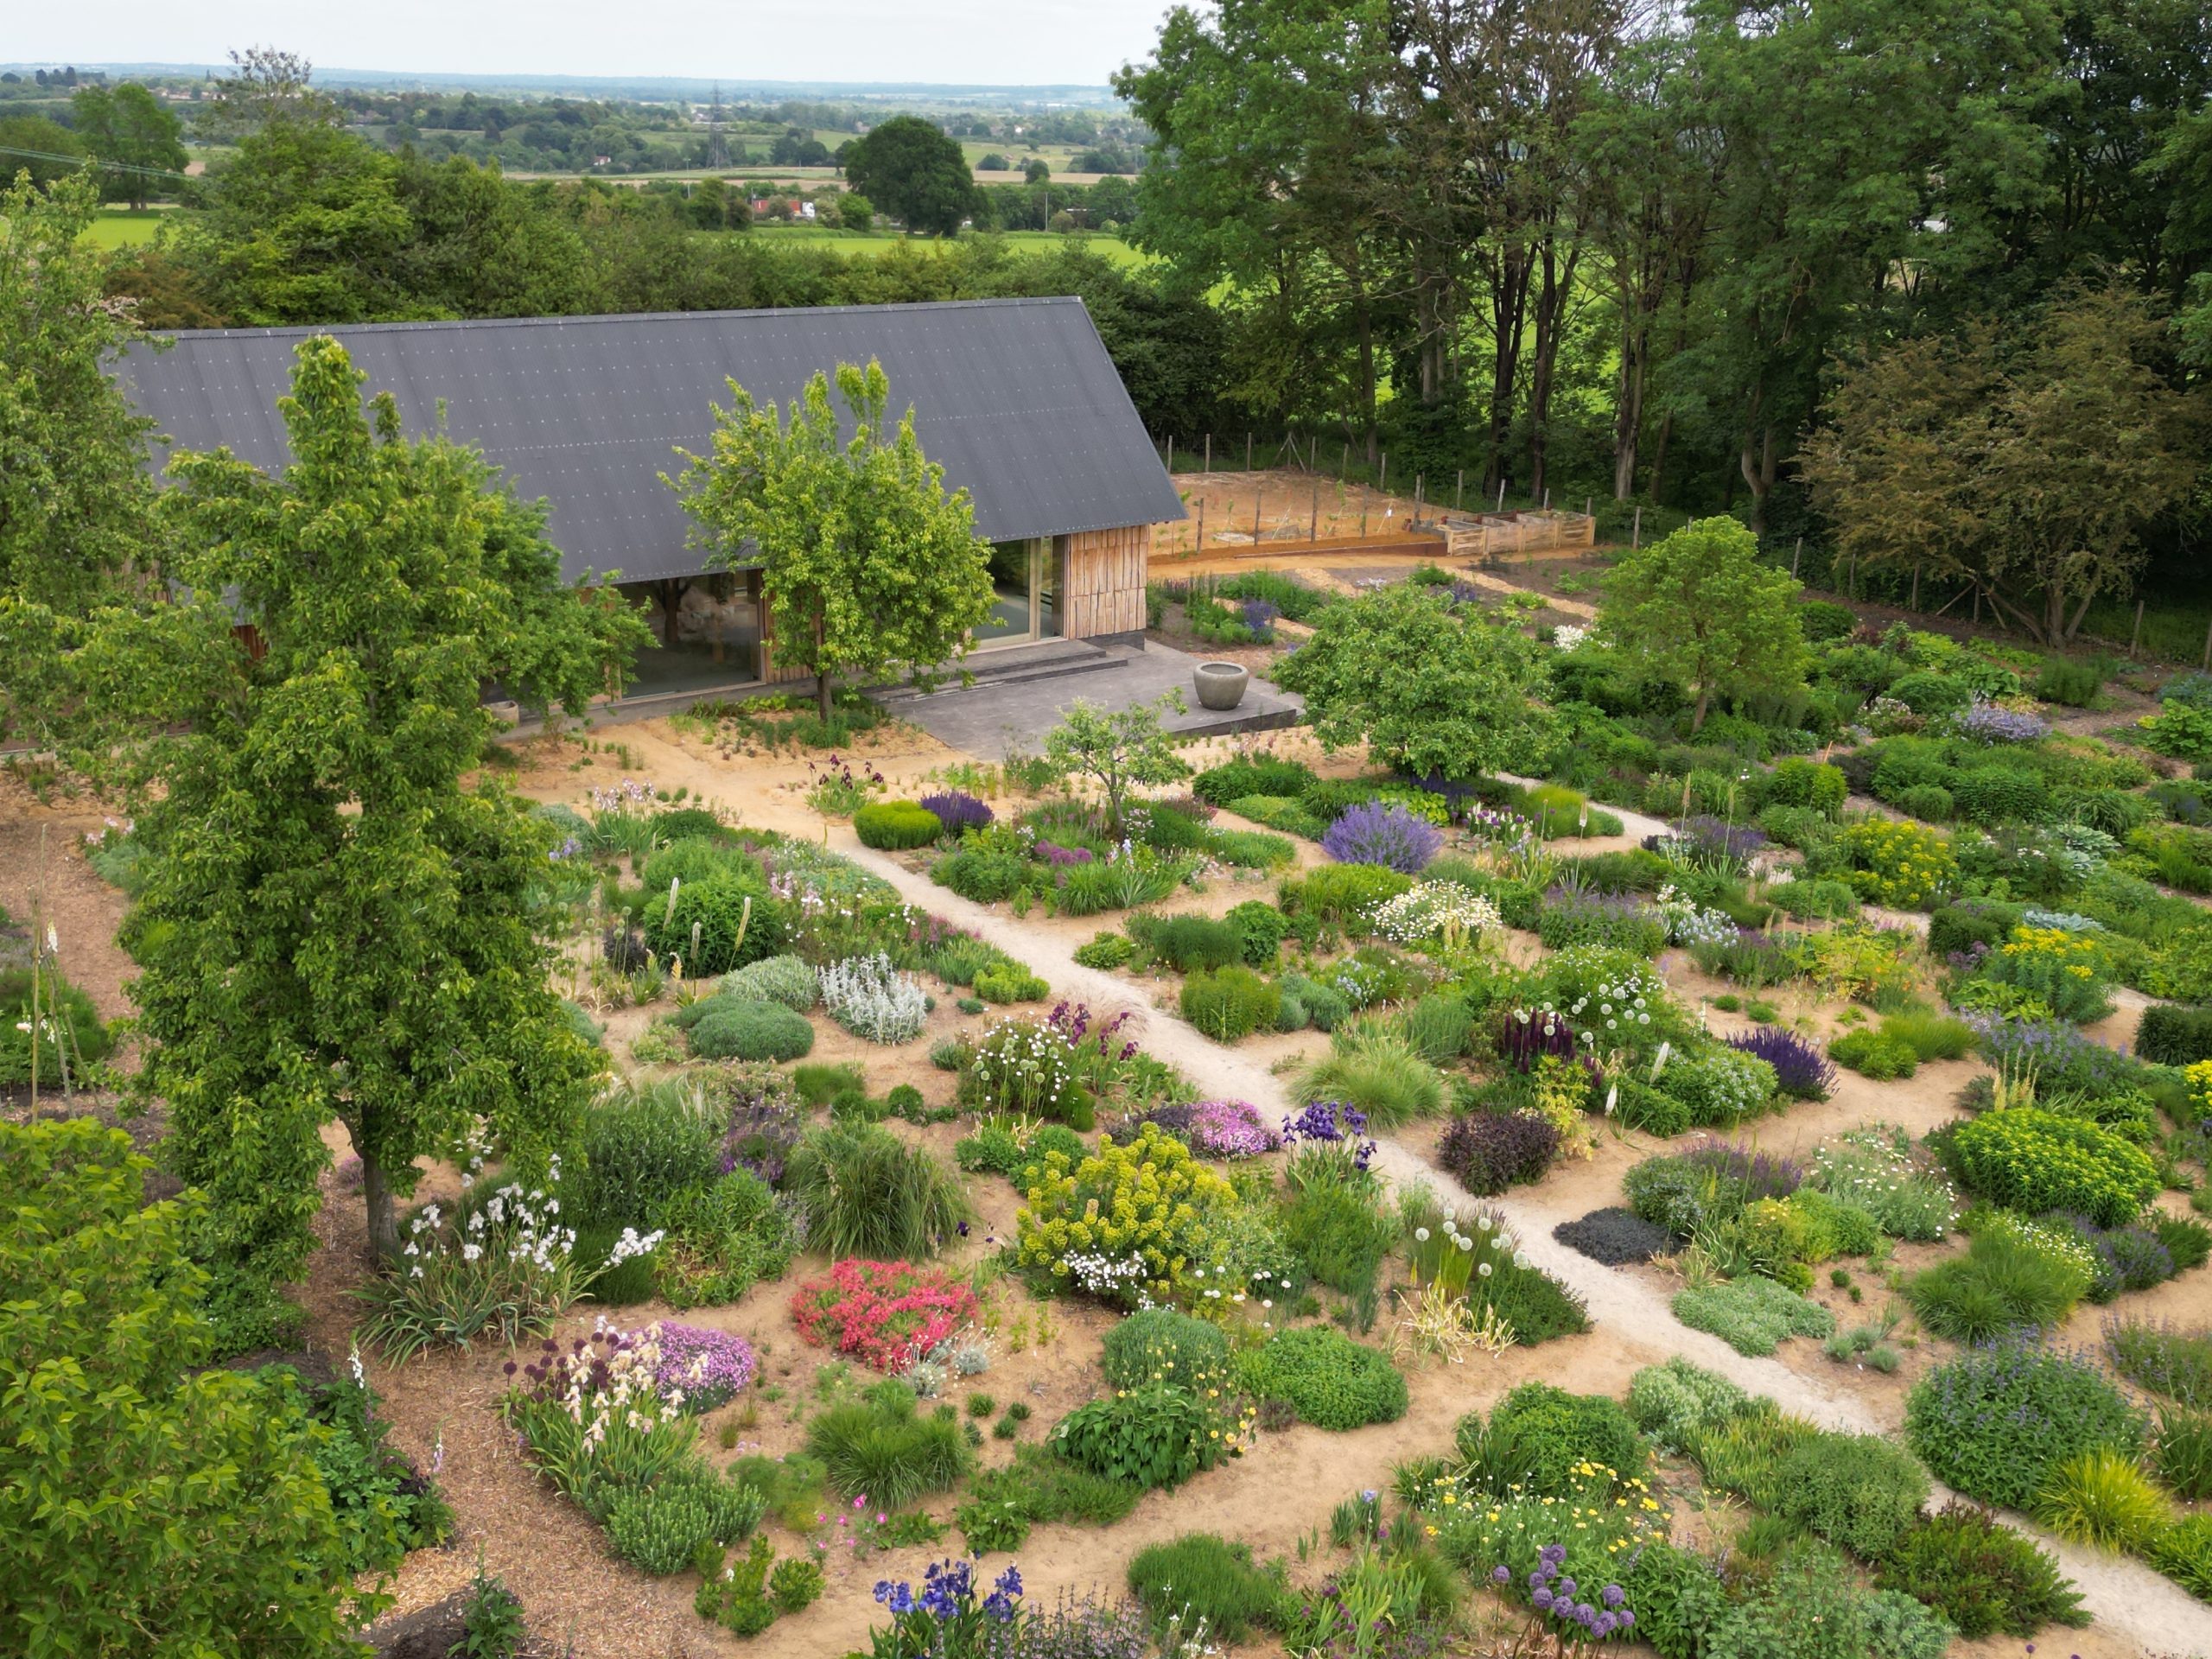 The Plant Library and the Orchard Barn at the Barn Garden, Hertfordshire home to Tom and Sue Stuart-Smith